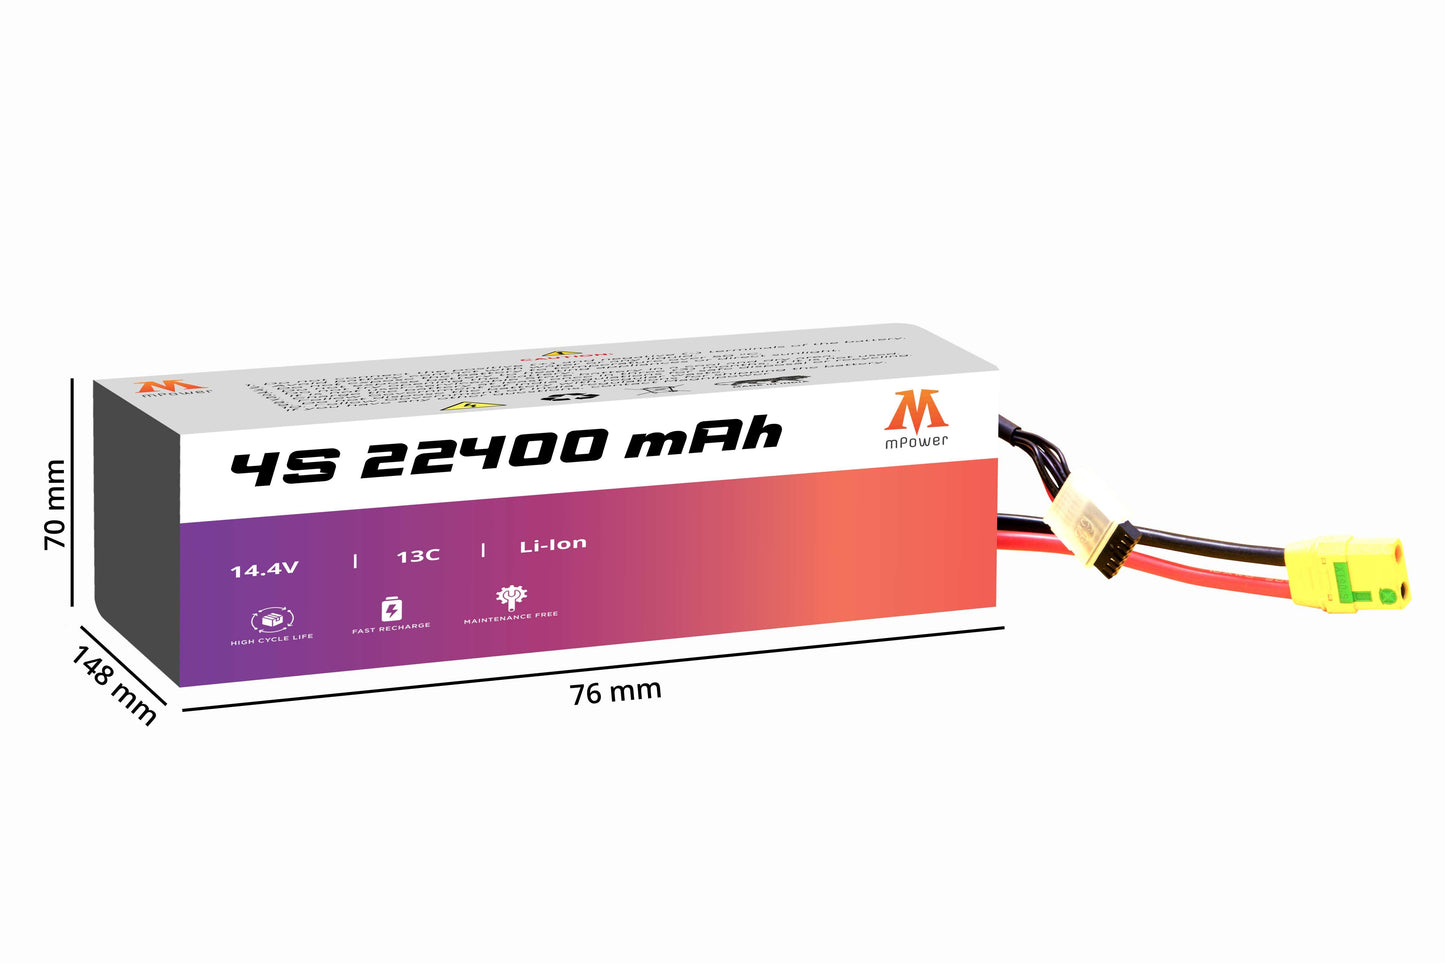 mPower 4S 22400mAh Lithium-Ion Battery for Survey Drones-mpowerlithium